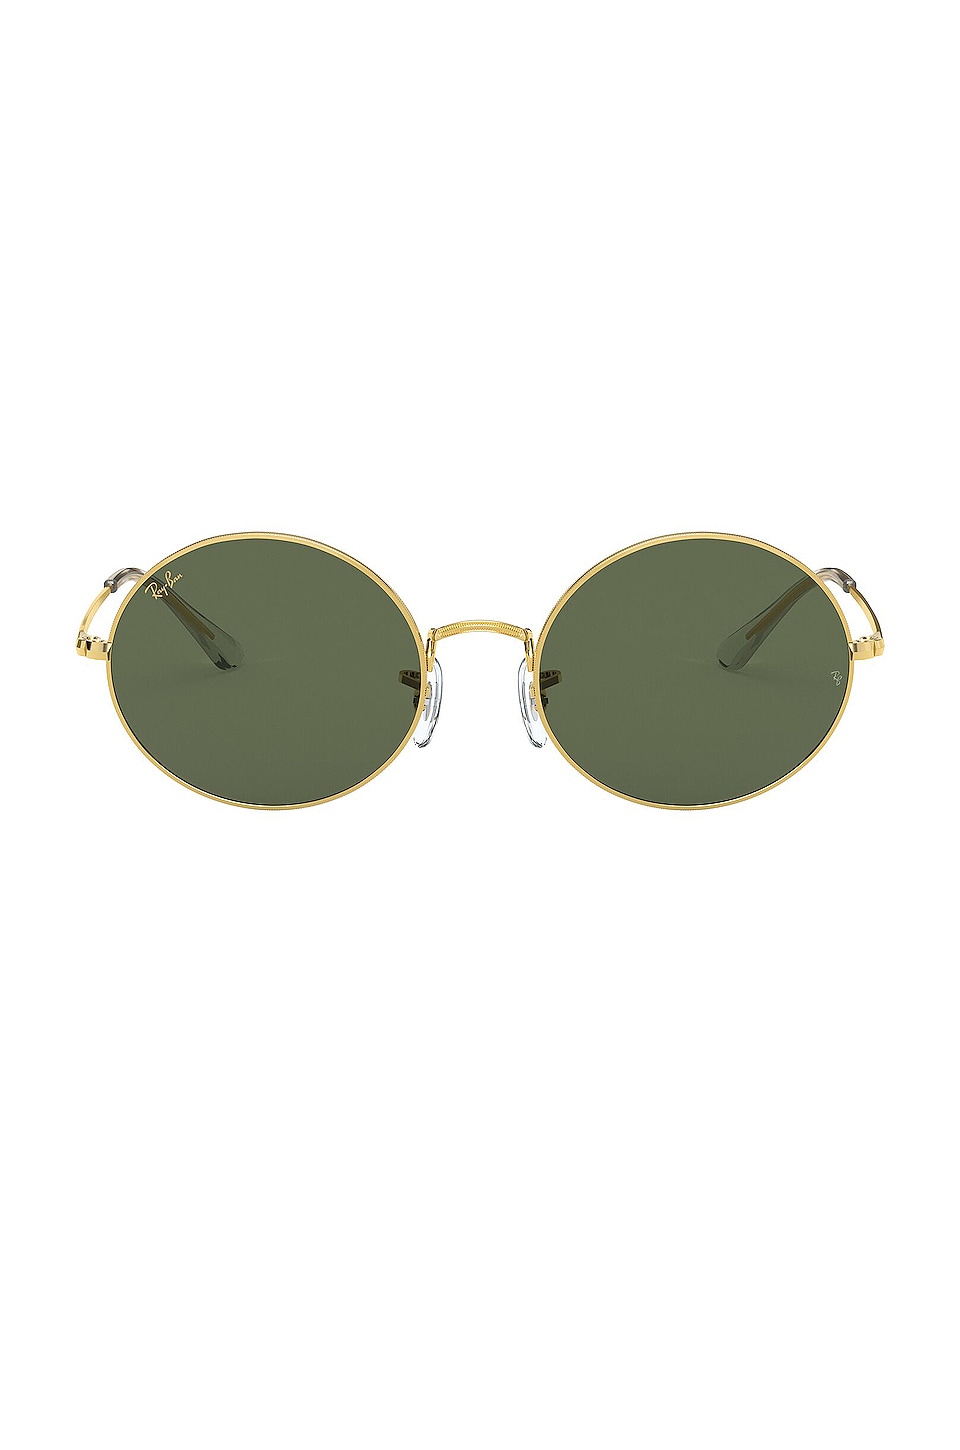 Ray-Ban Round Circle Metal in Legend Gold & Green | REVOLVE